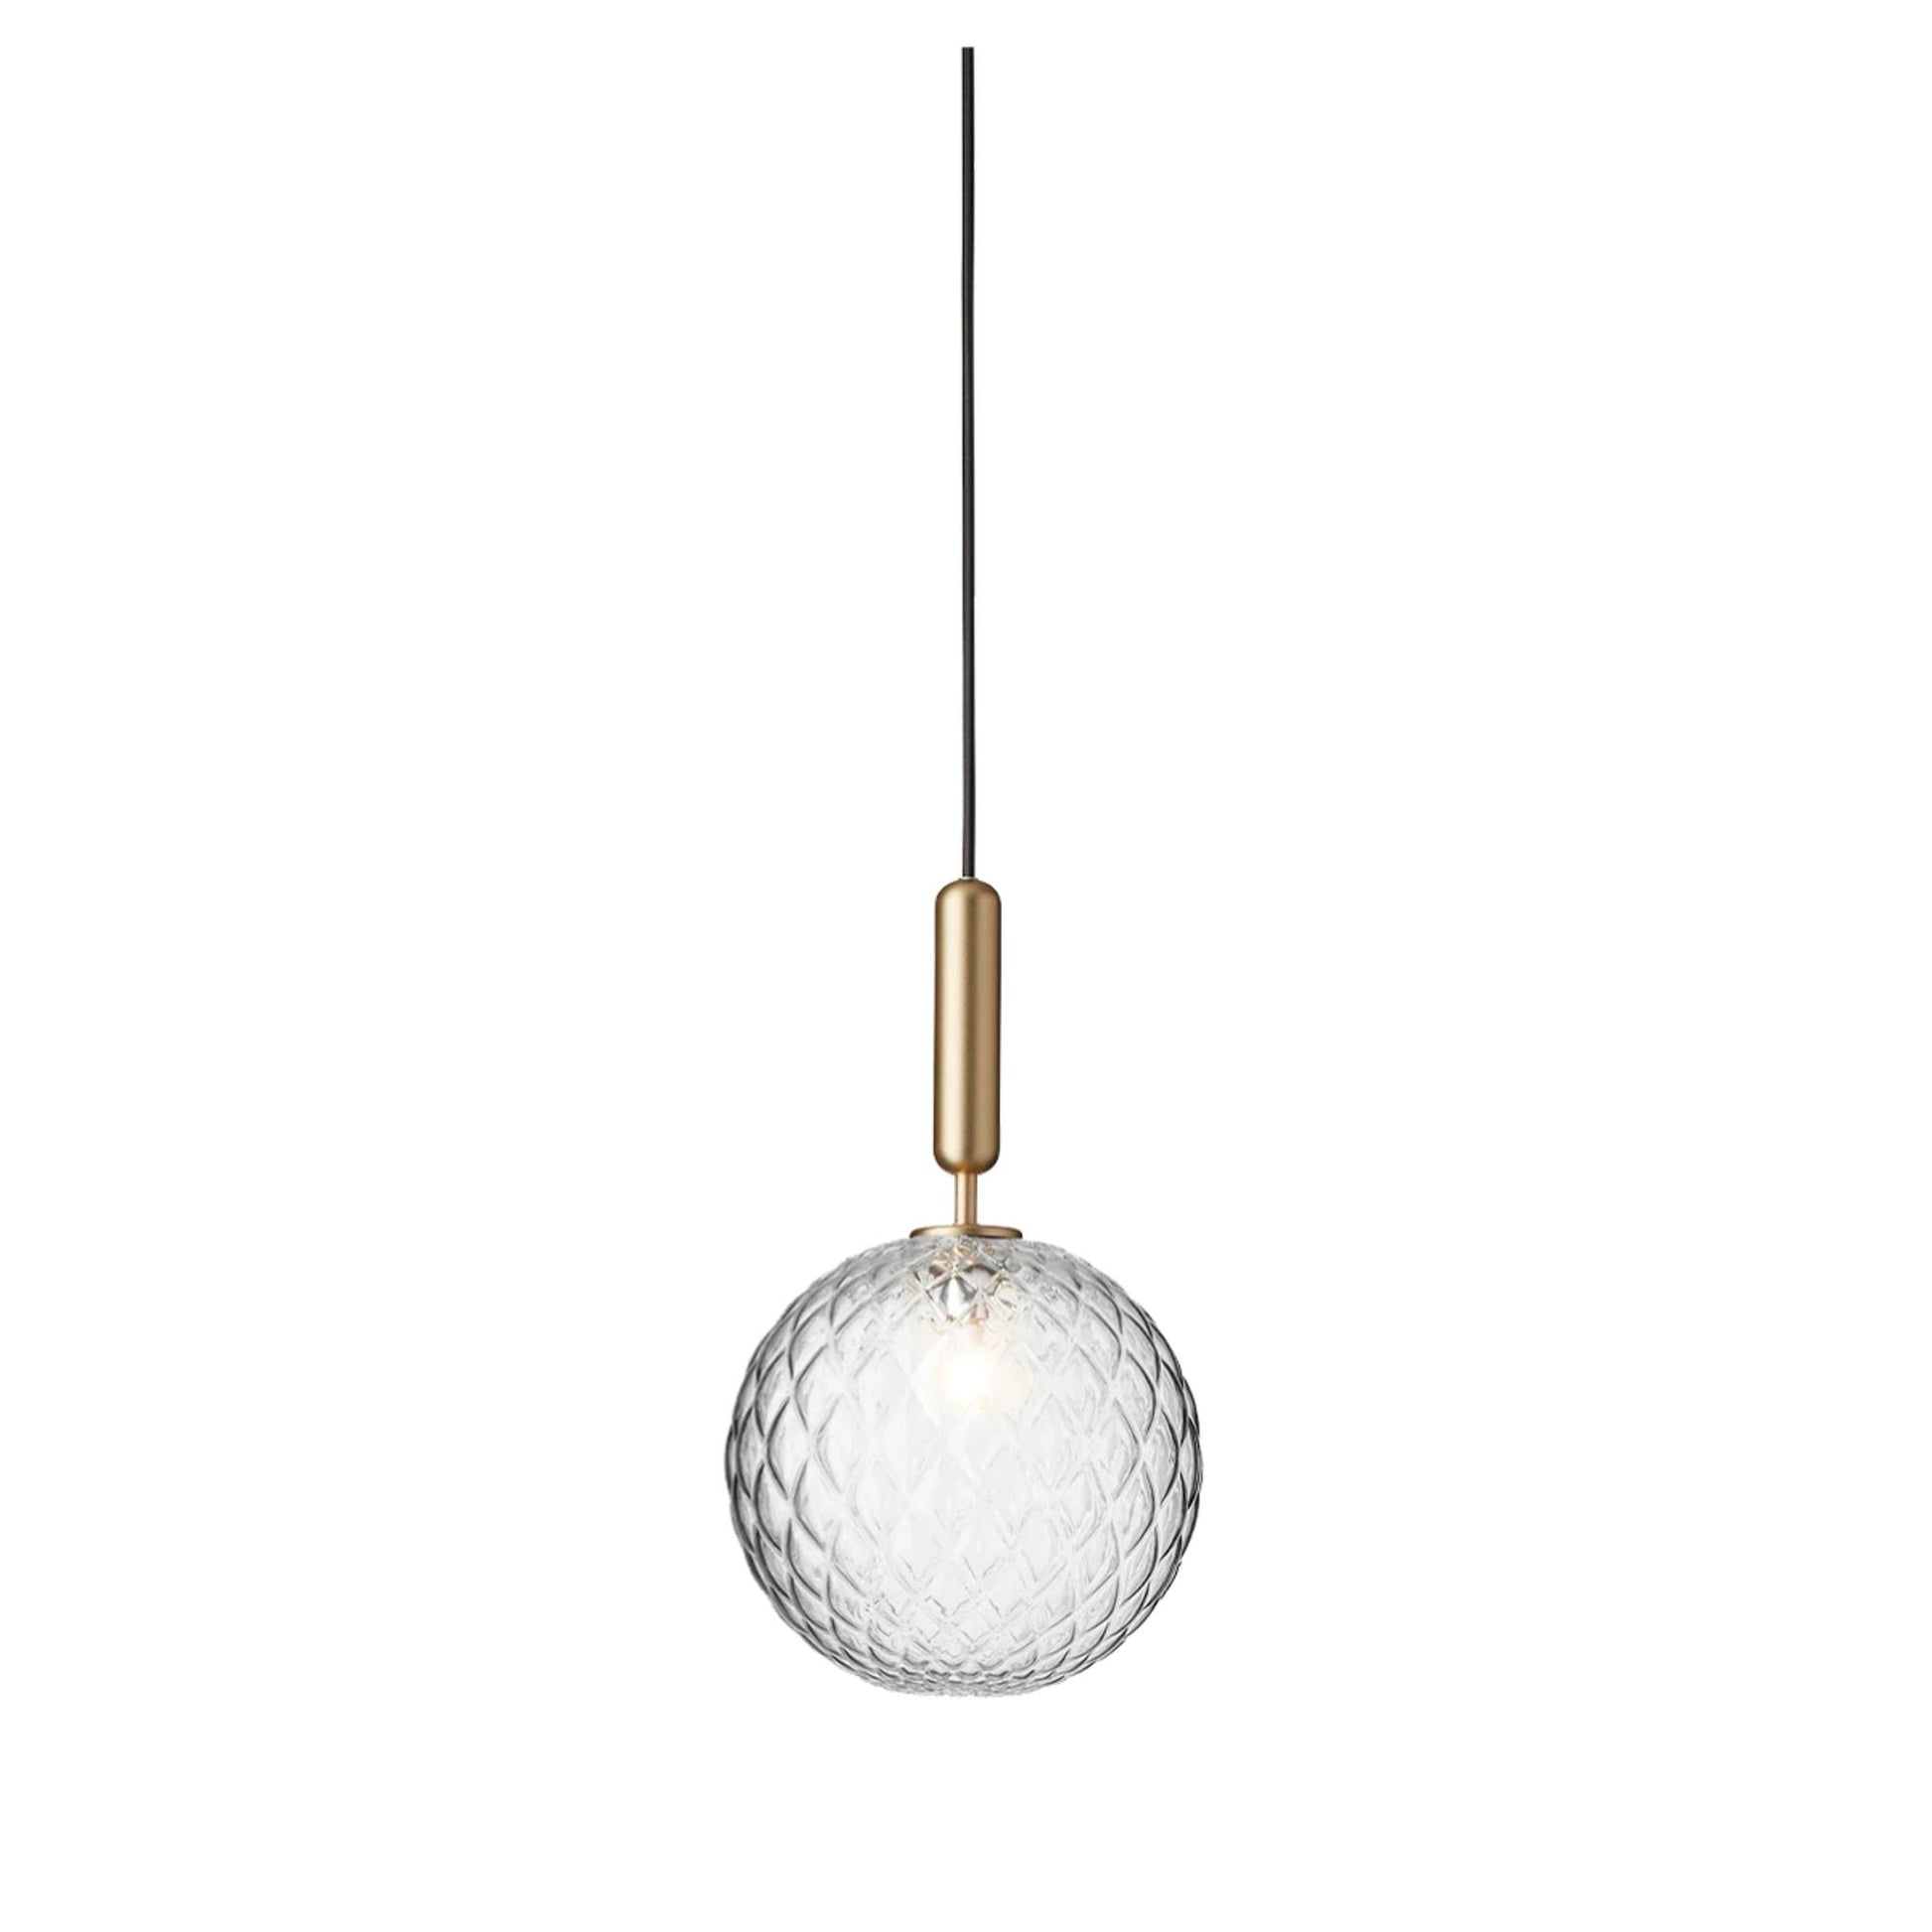 Miira 1 Pendant Lamp Large by Nuura #Brass & Clear